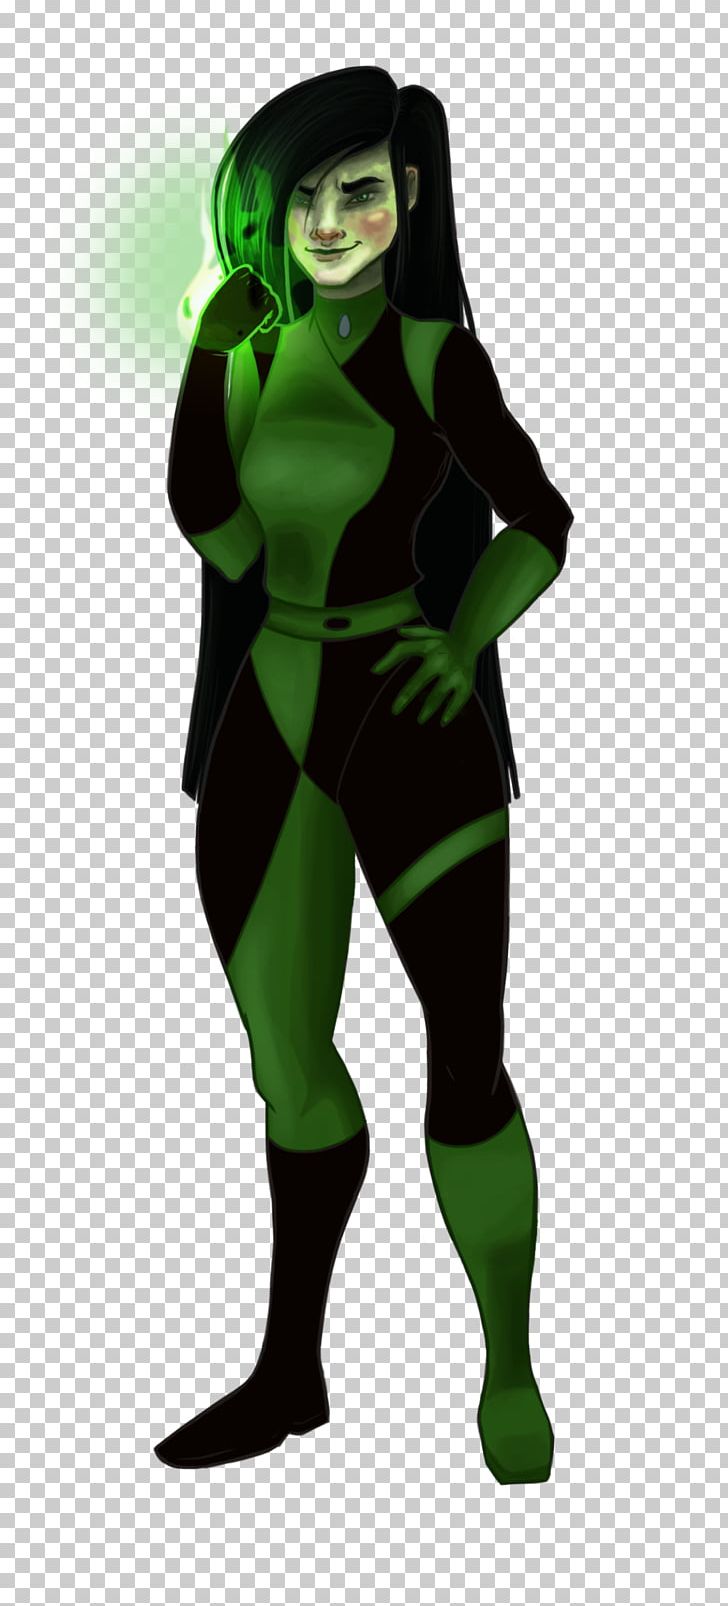 Superhero Green Spandex Costume Animated Cartoon PNG, Clipart, Animated Cartoon, Costume, Fictional Character, Green, Kim Possible Free PNG Download